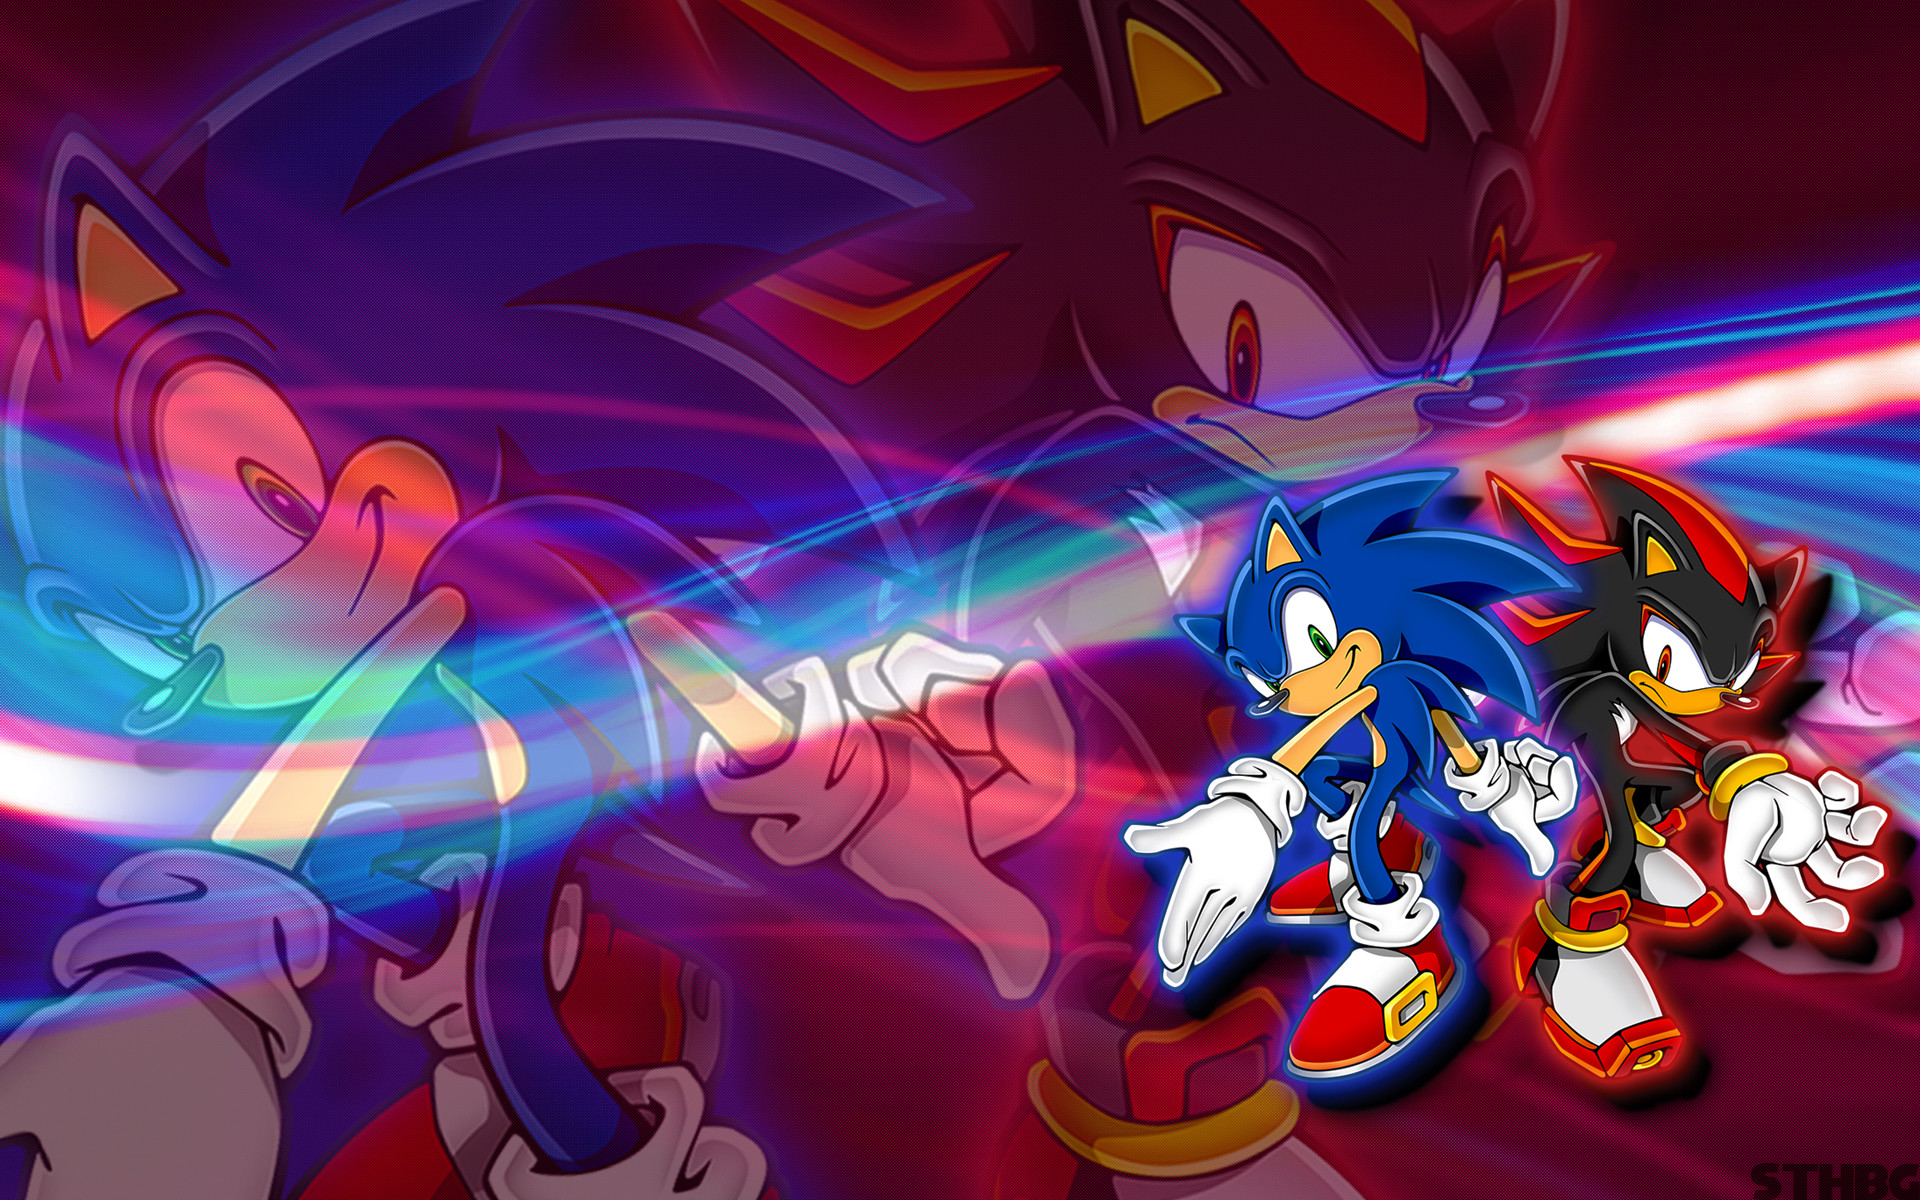 Sonic,Shadow And Silver Wallpaper By SonicTheHedgehogBG On DeviantArt